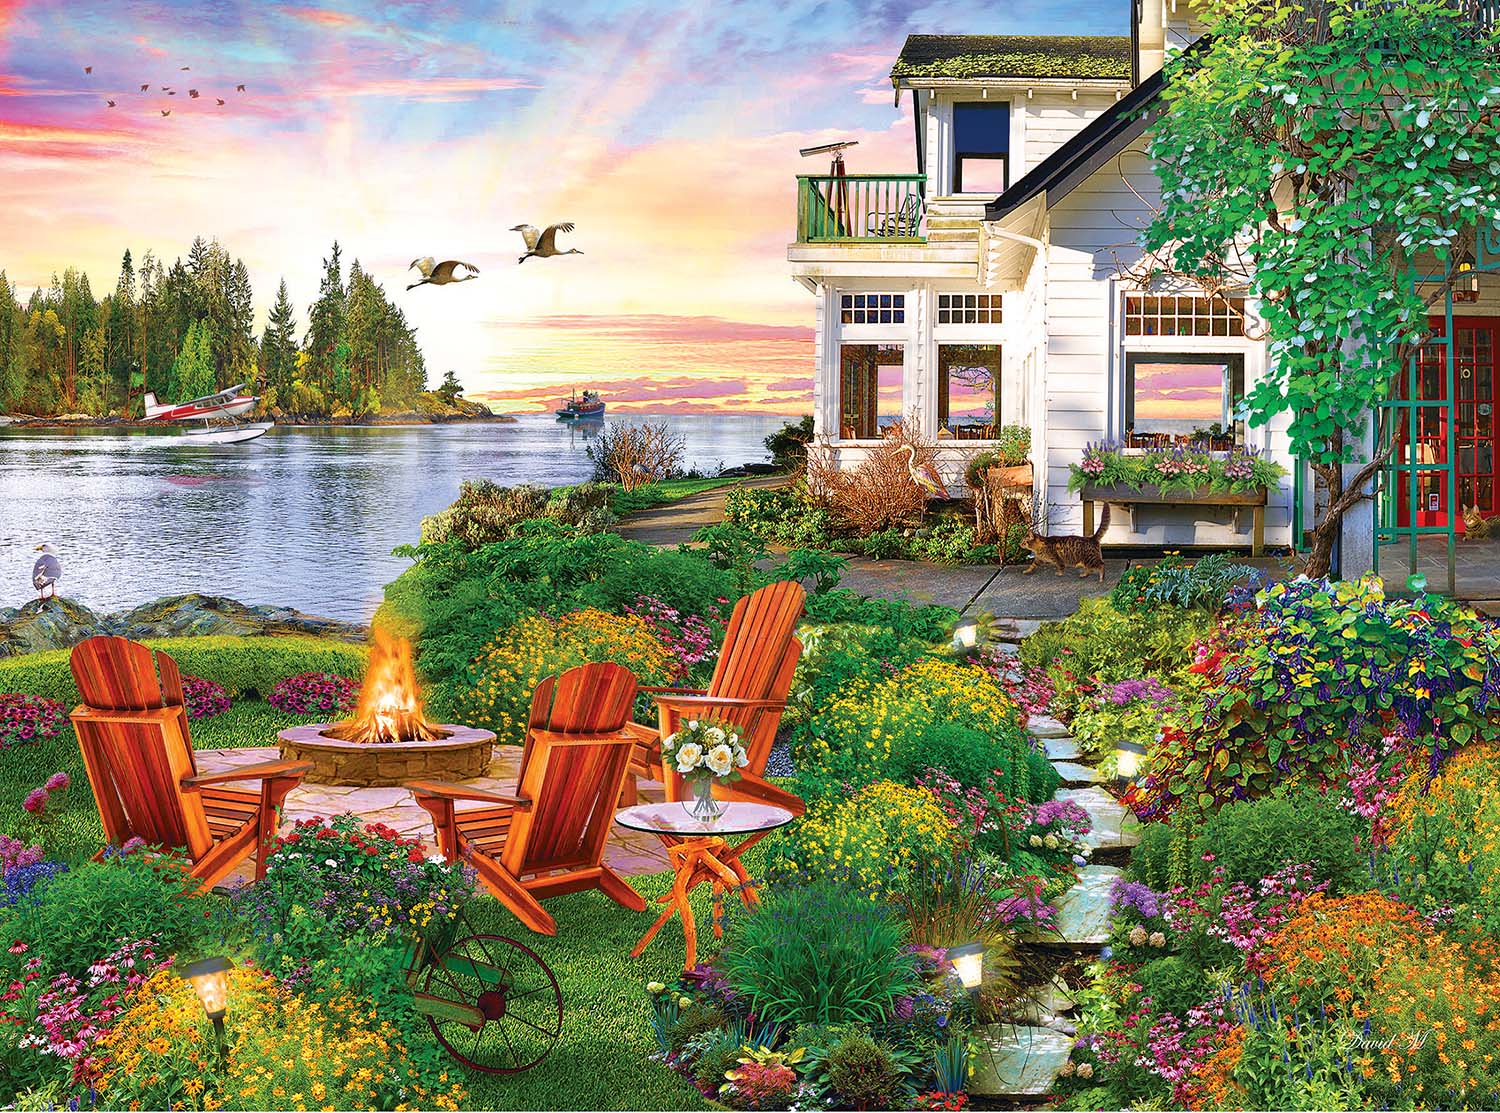 My Happy Place - Harbour House - Scratch and Dent Landscape Jigsaw Puzzle